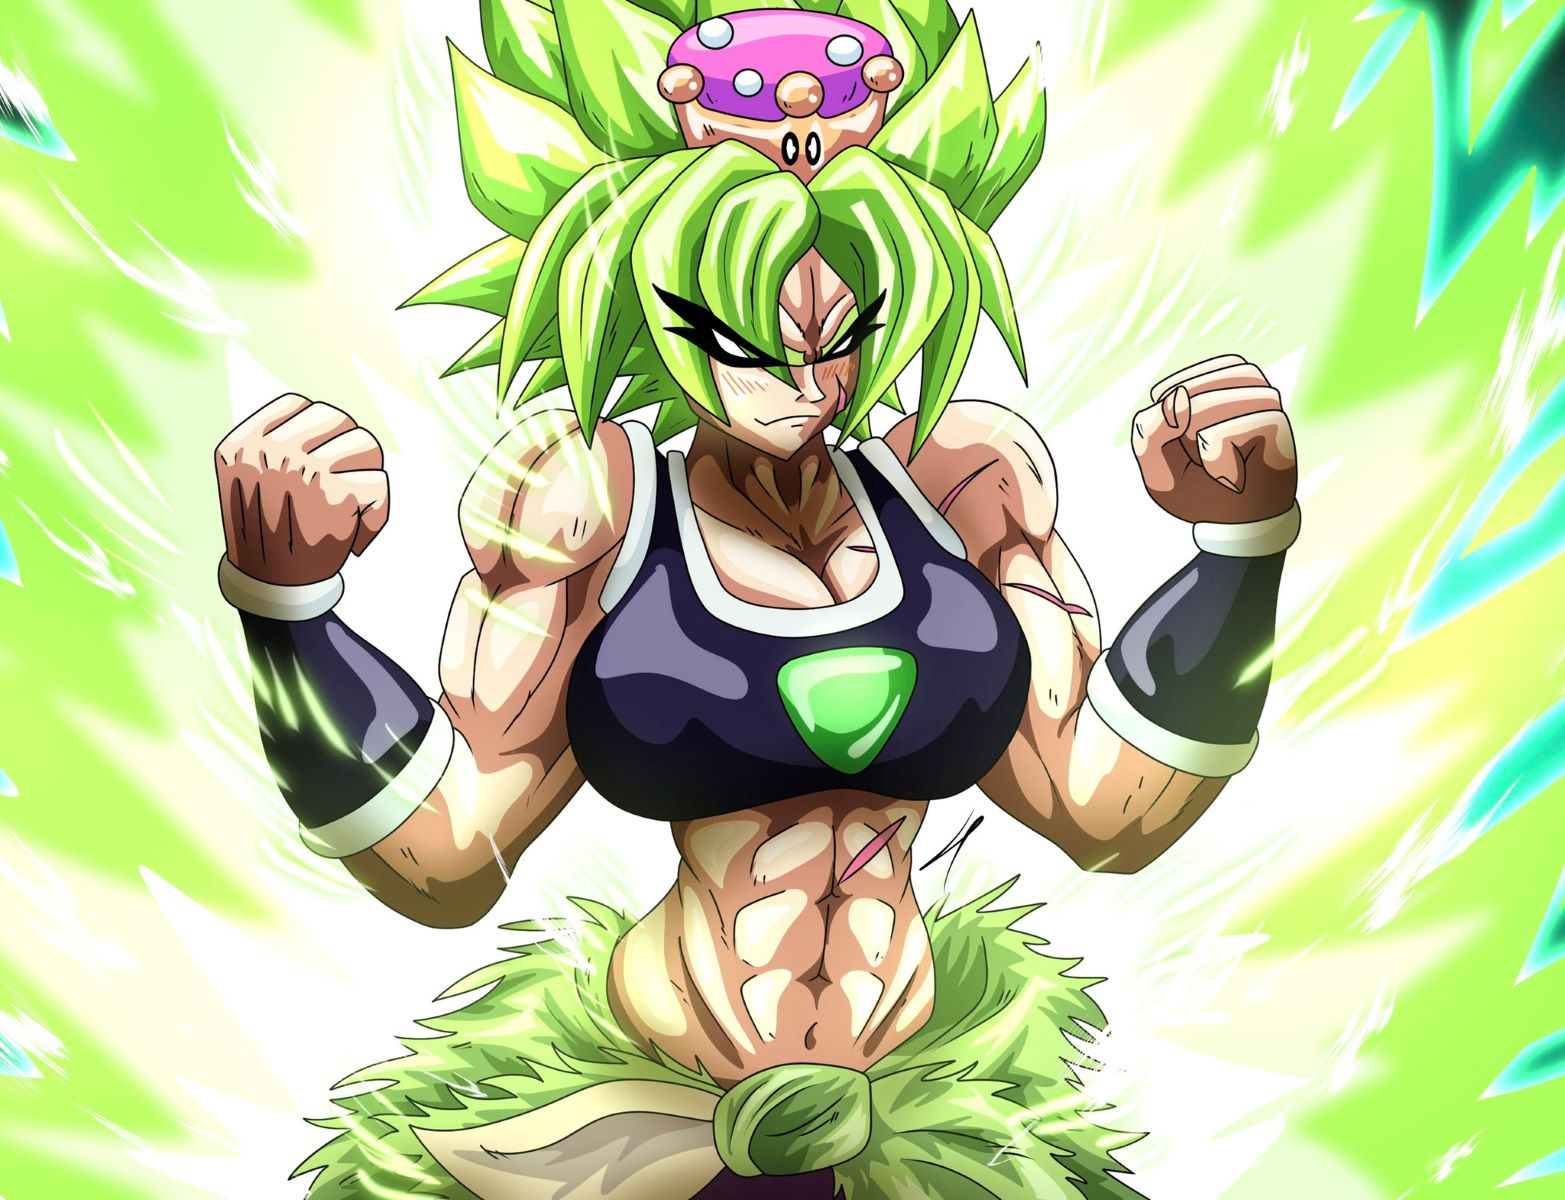 Introducing The Female Broly: Unleashing Her Power!